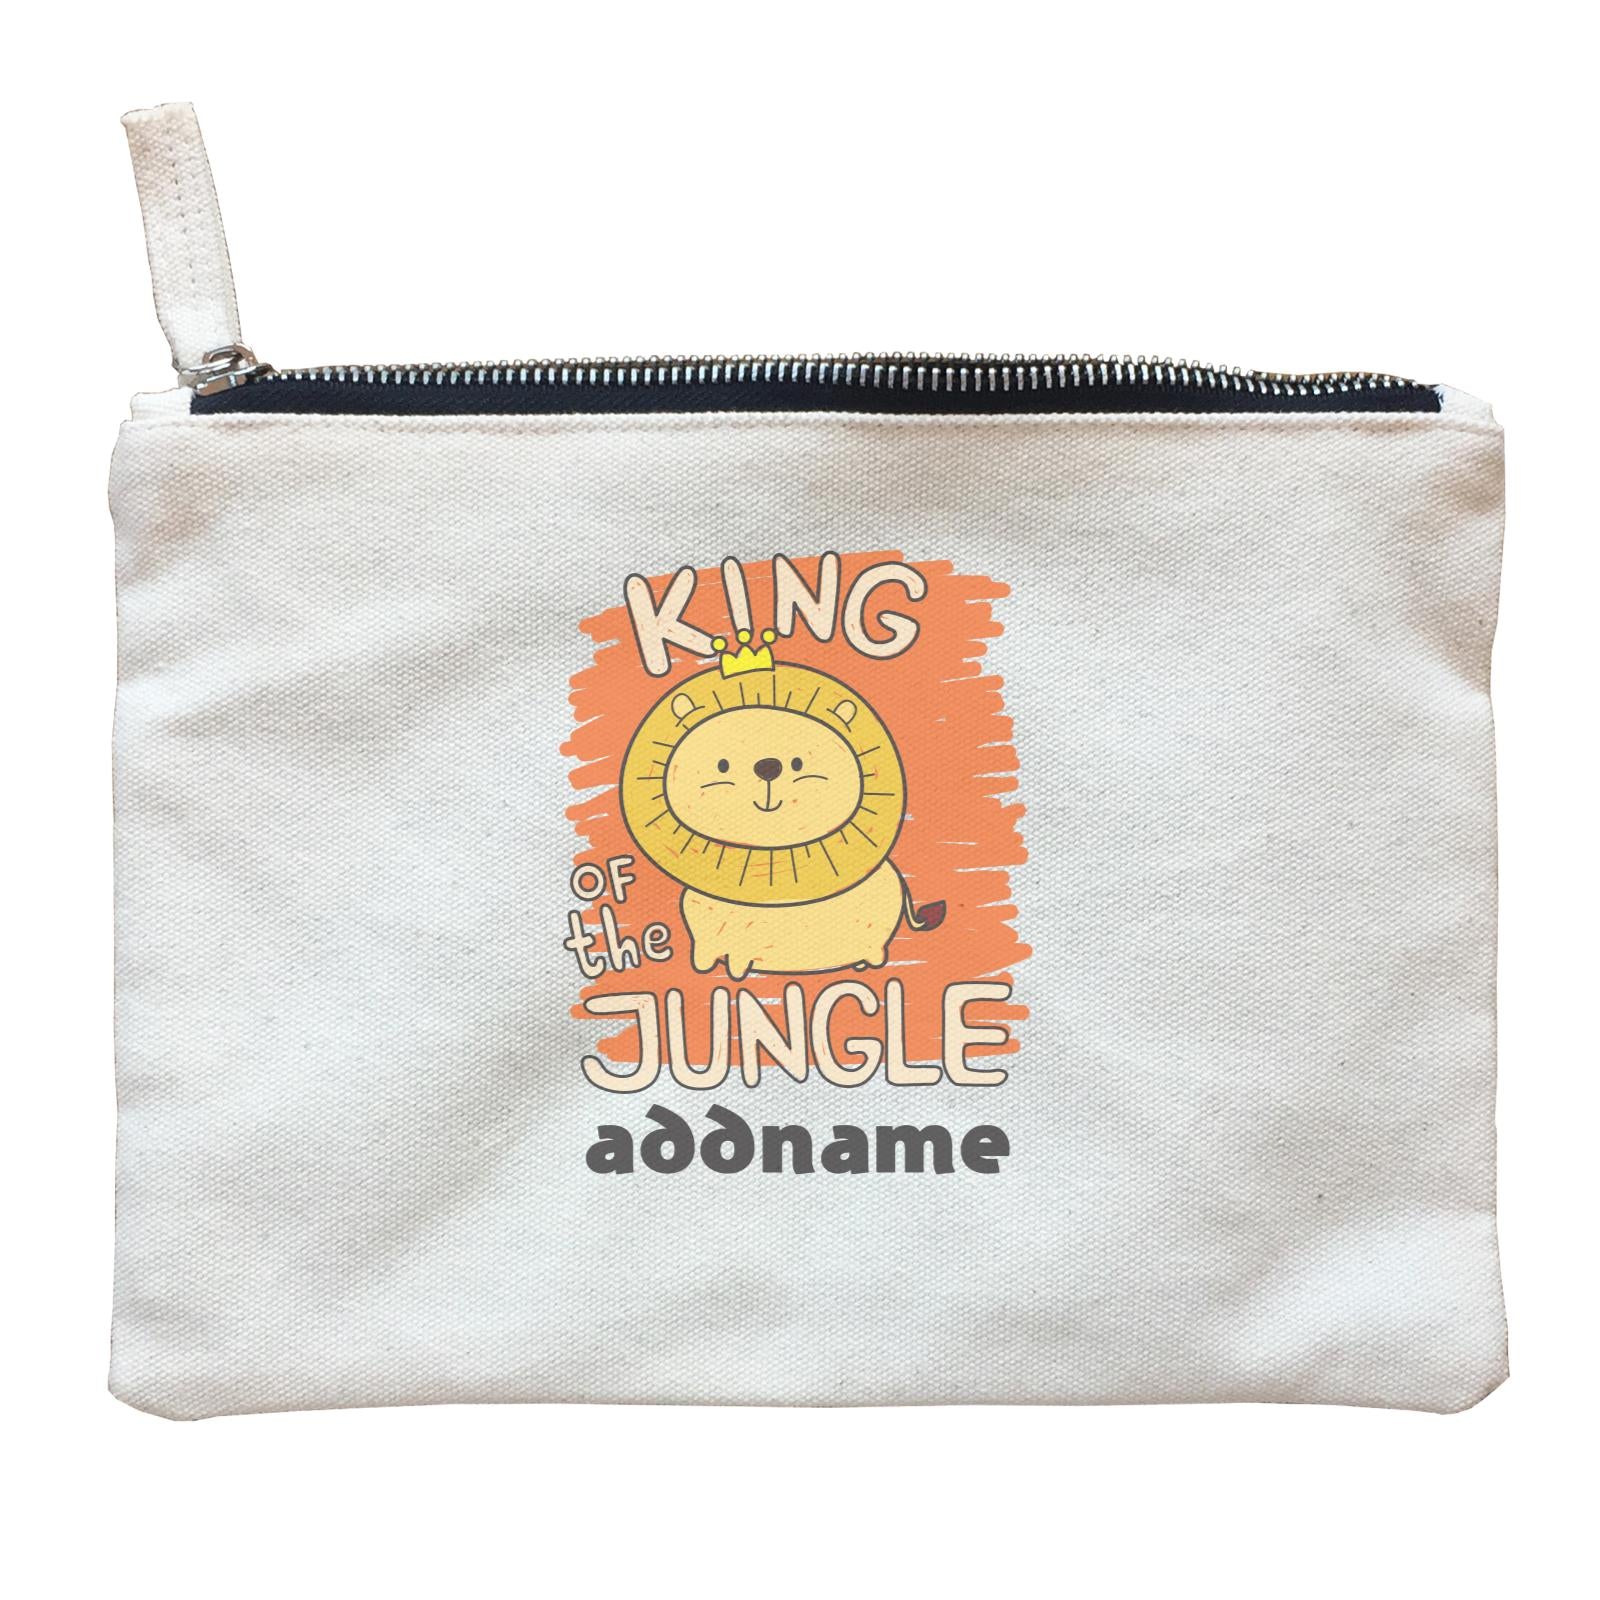 Cool Cute Animals Lion King Of The Jungle Addname Zipper Pouch